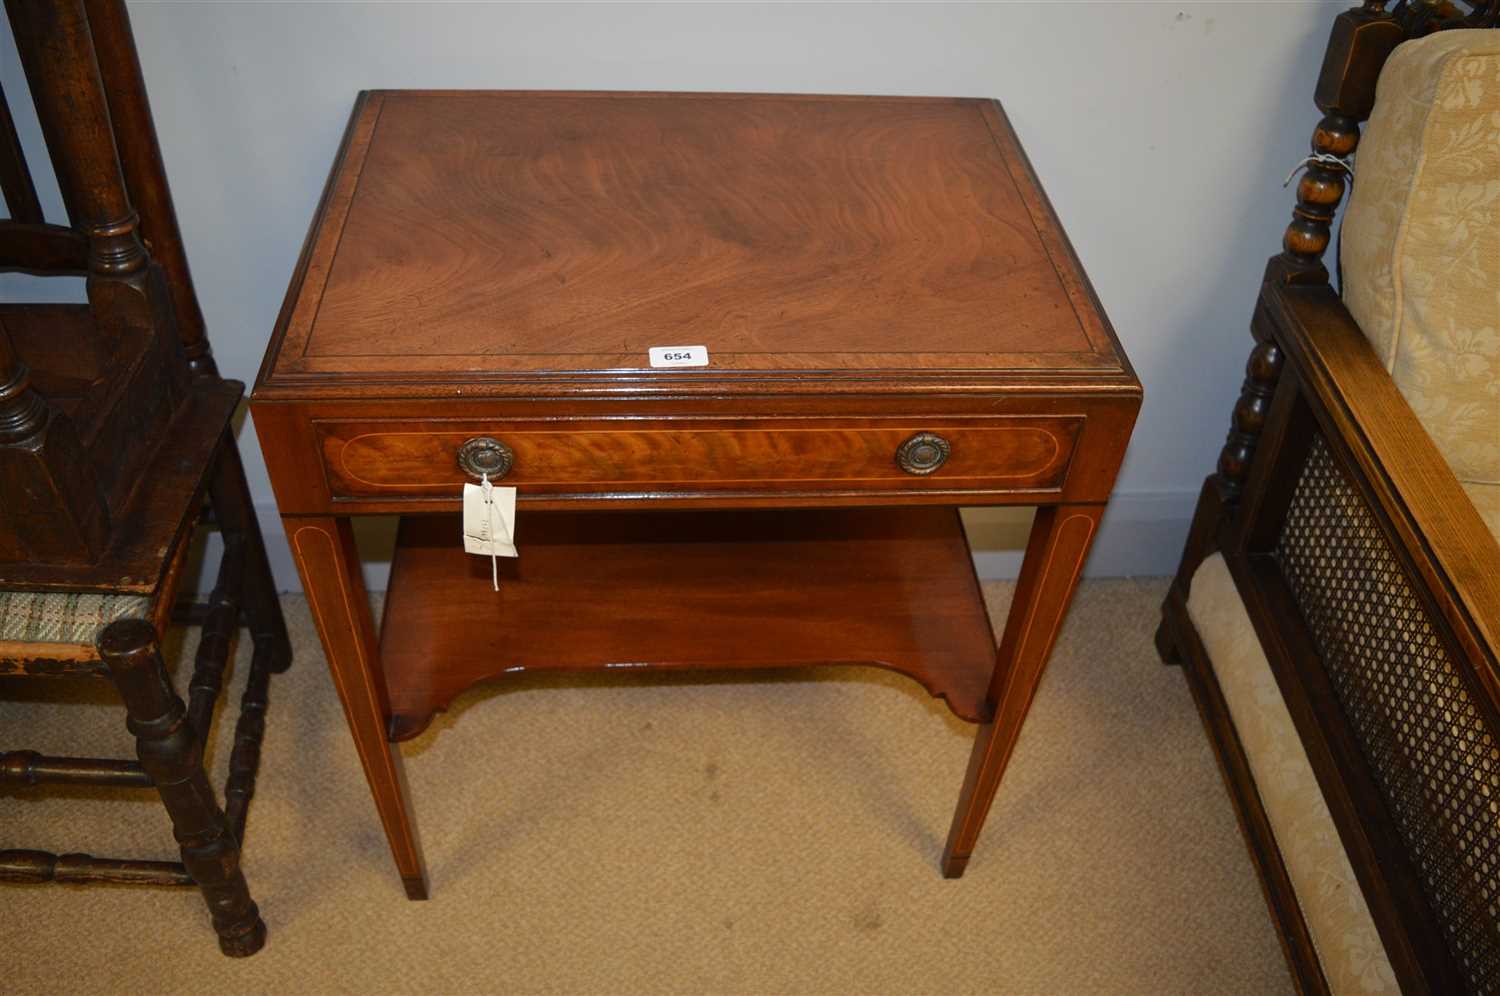 Lot 654 - Side table